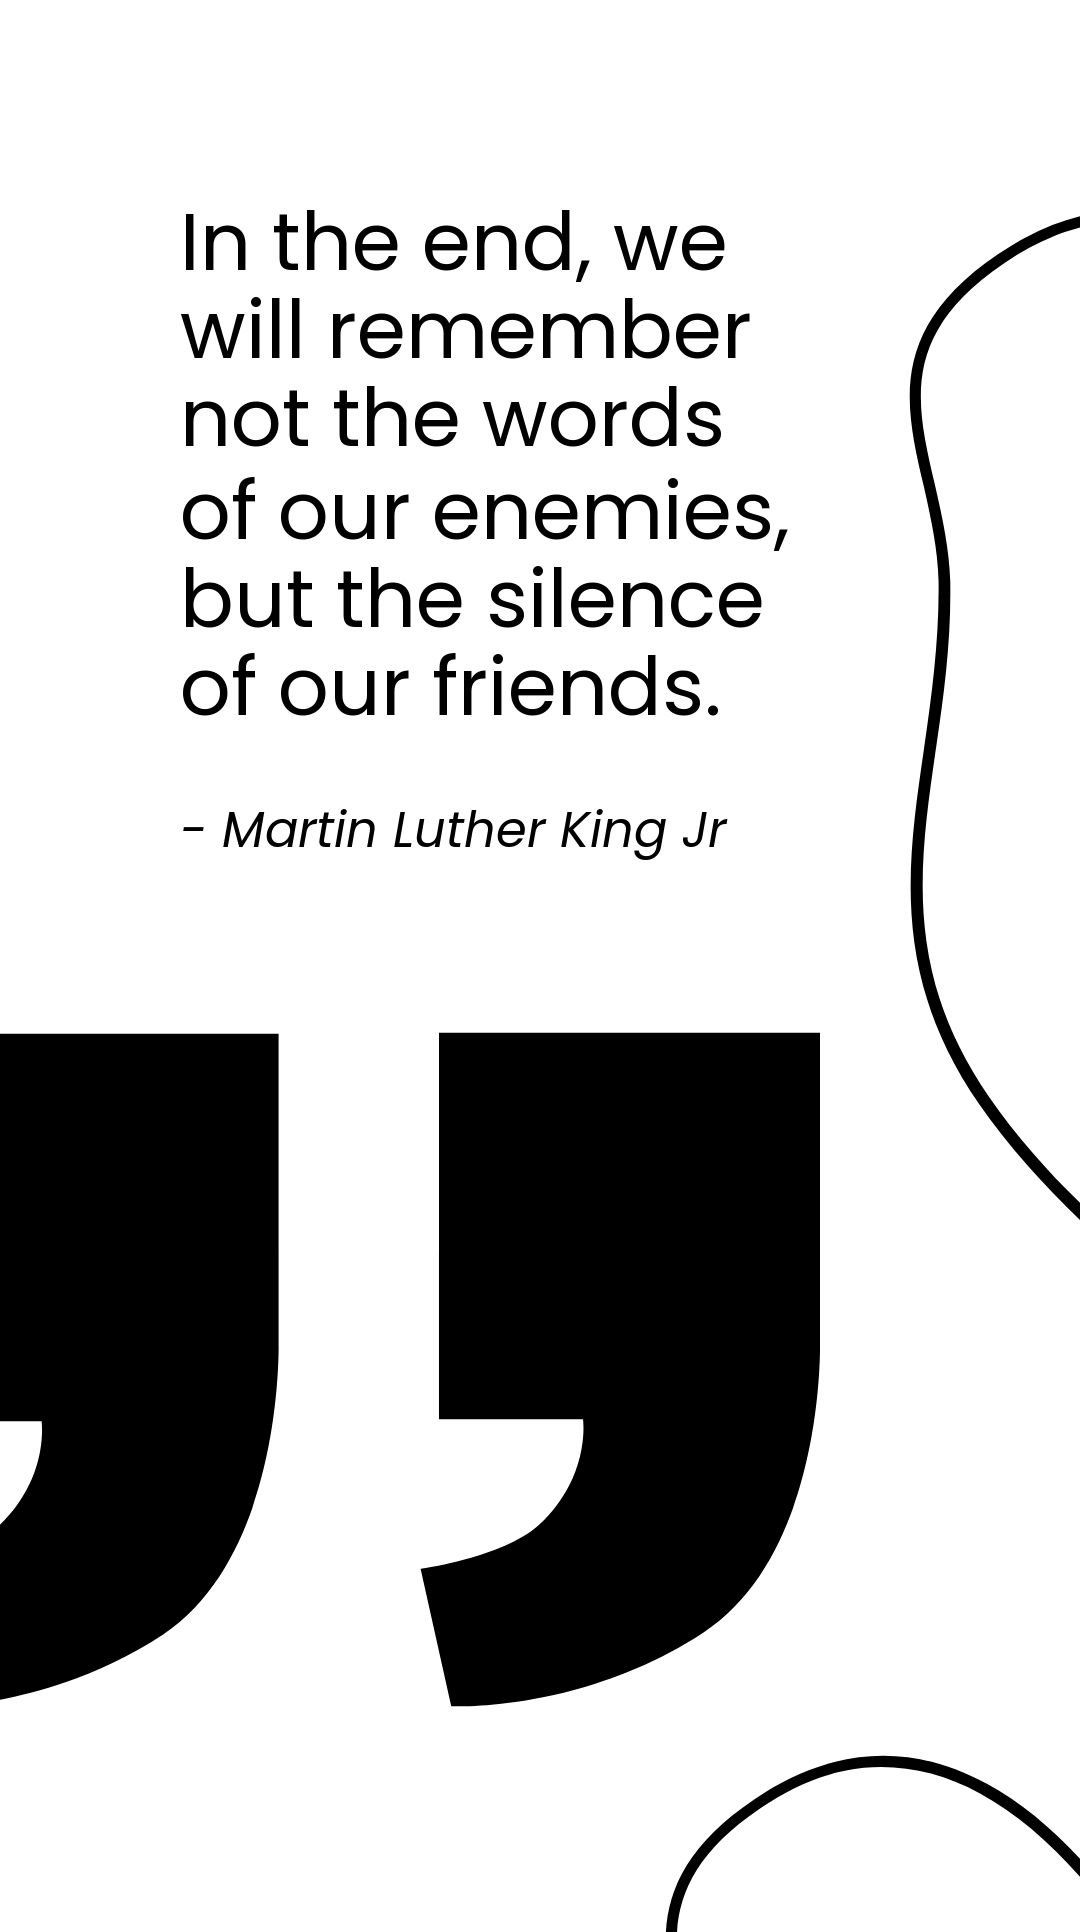 Martin Luther King Jr. - "In the end, we will remember not the words of our enemies, but the silence of our friends."